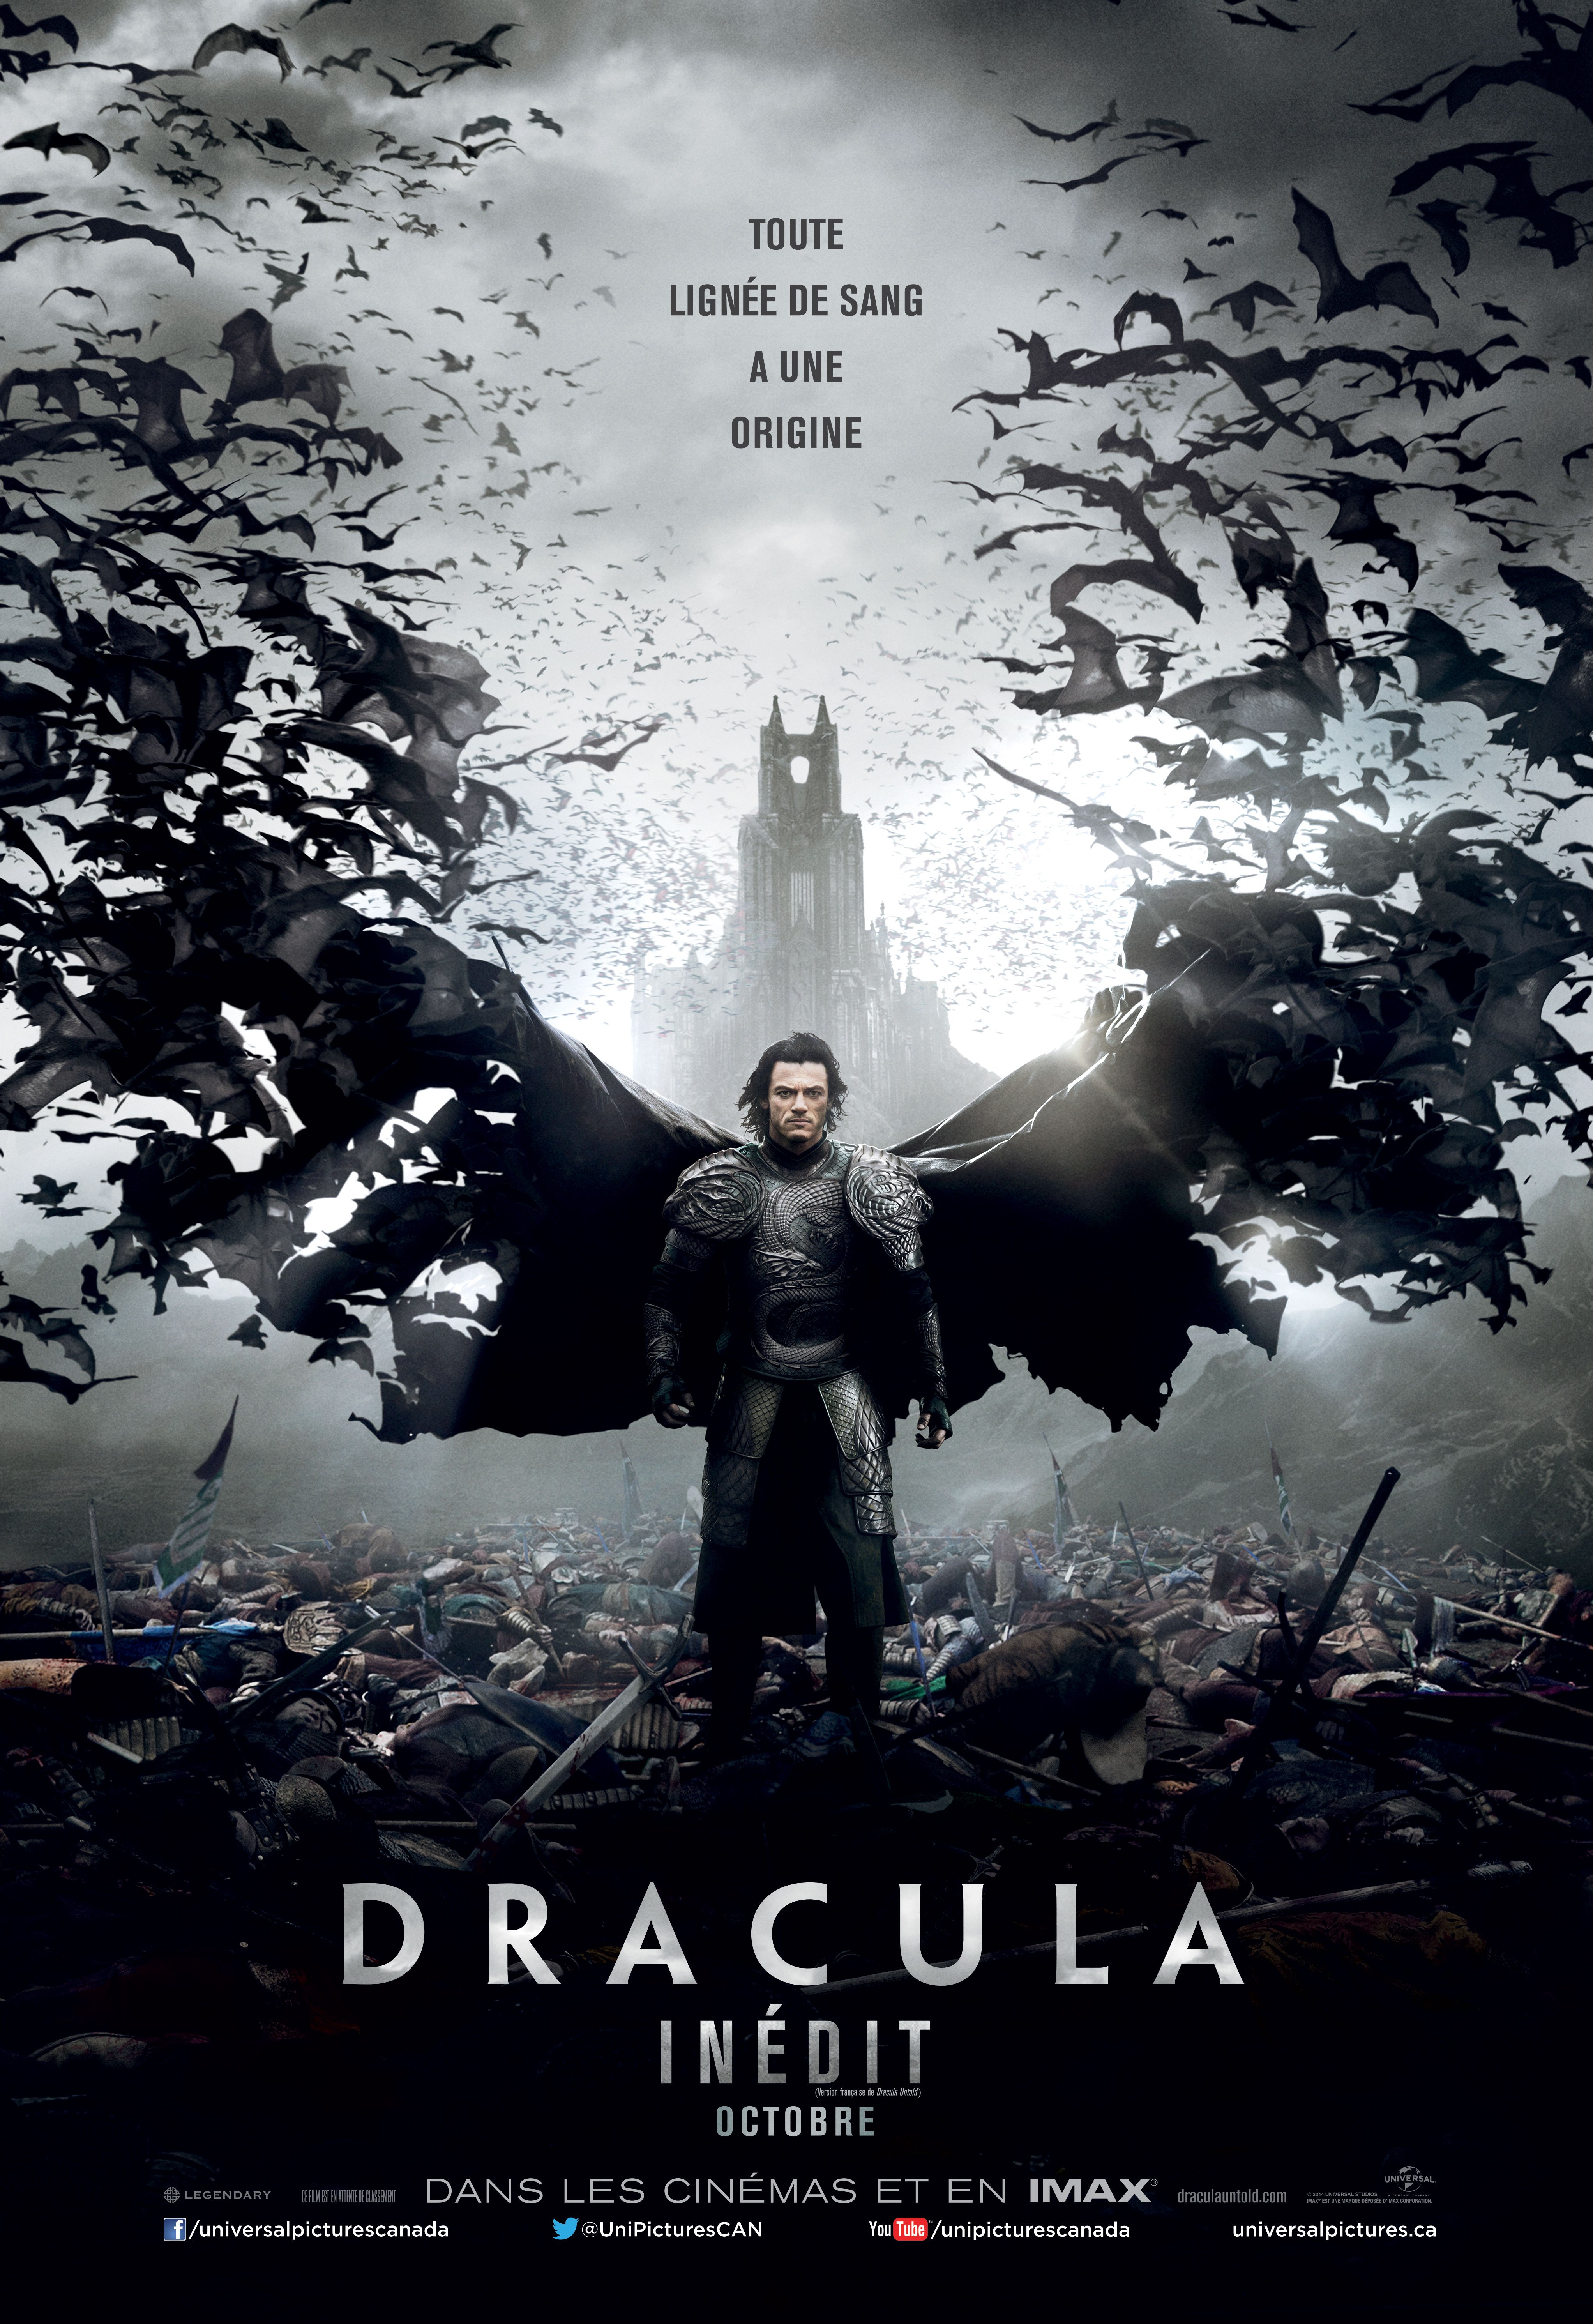 Poster of the movie Dracula inédit